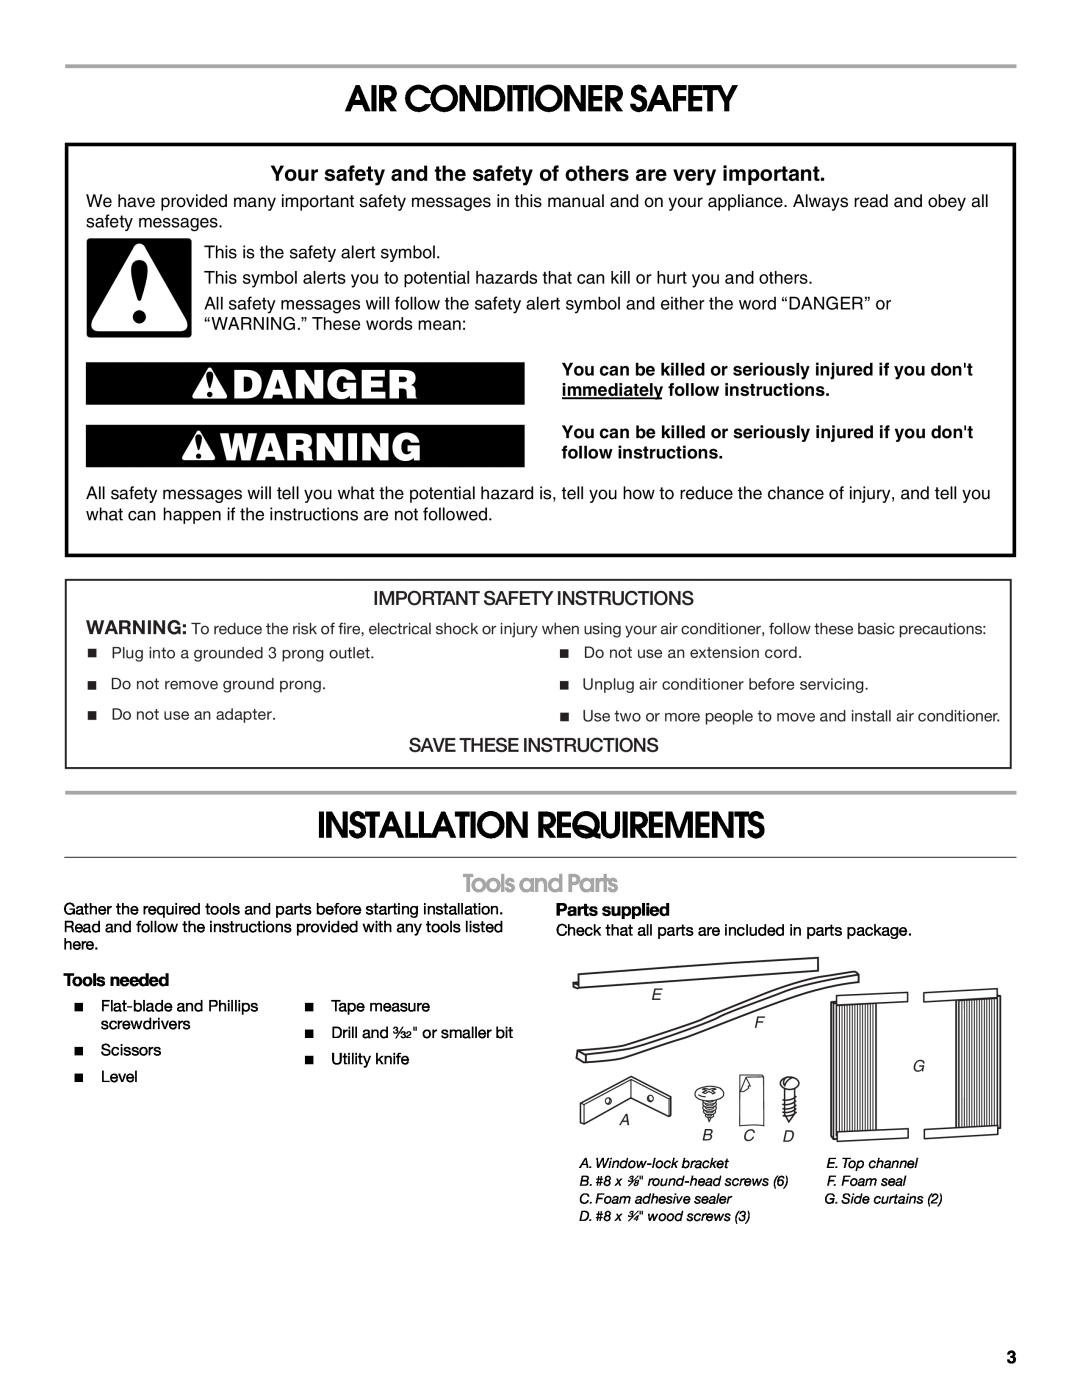 Whirlpool ACM052PS0 Air Conditioner Safety, Installation Requirements, Tools and Parts, Important Safety Instructions 